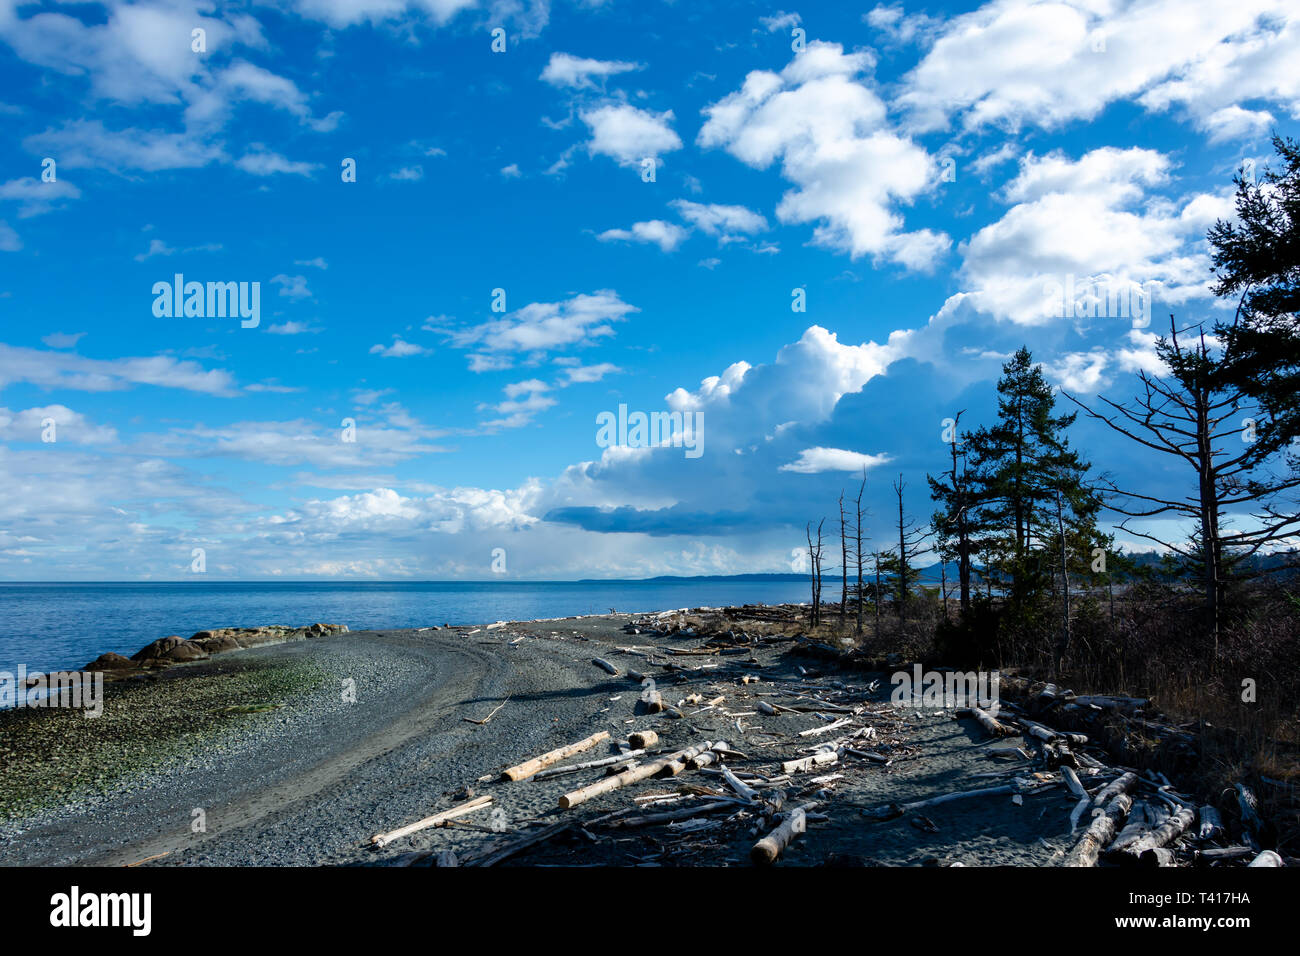 Logs by a coastal road, Vancouver Island, British Columbia, Canada Stock Photo